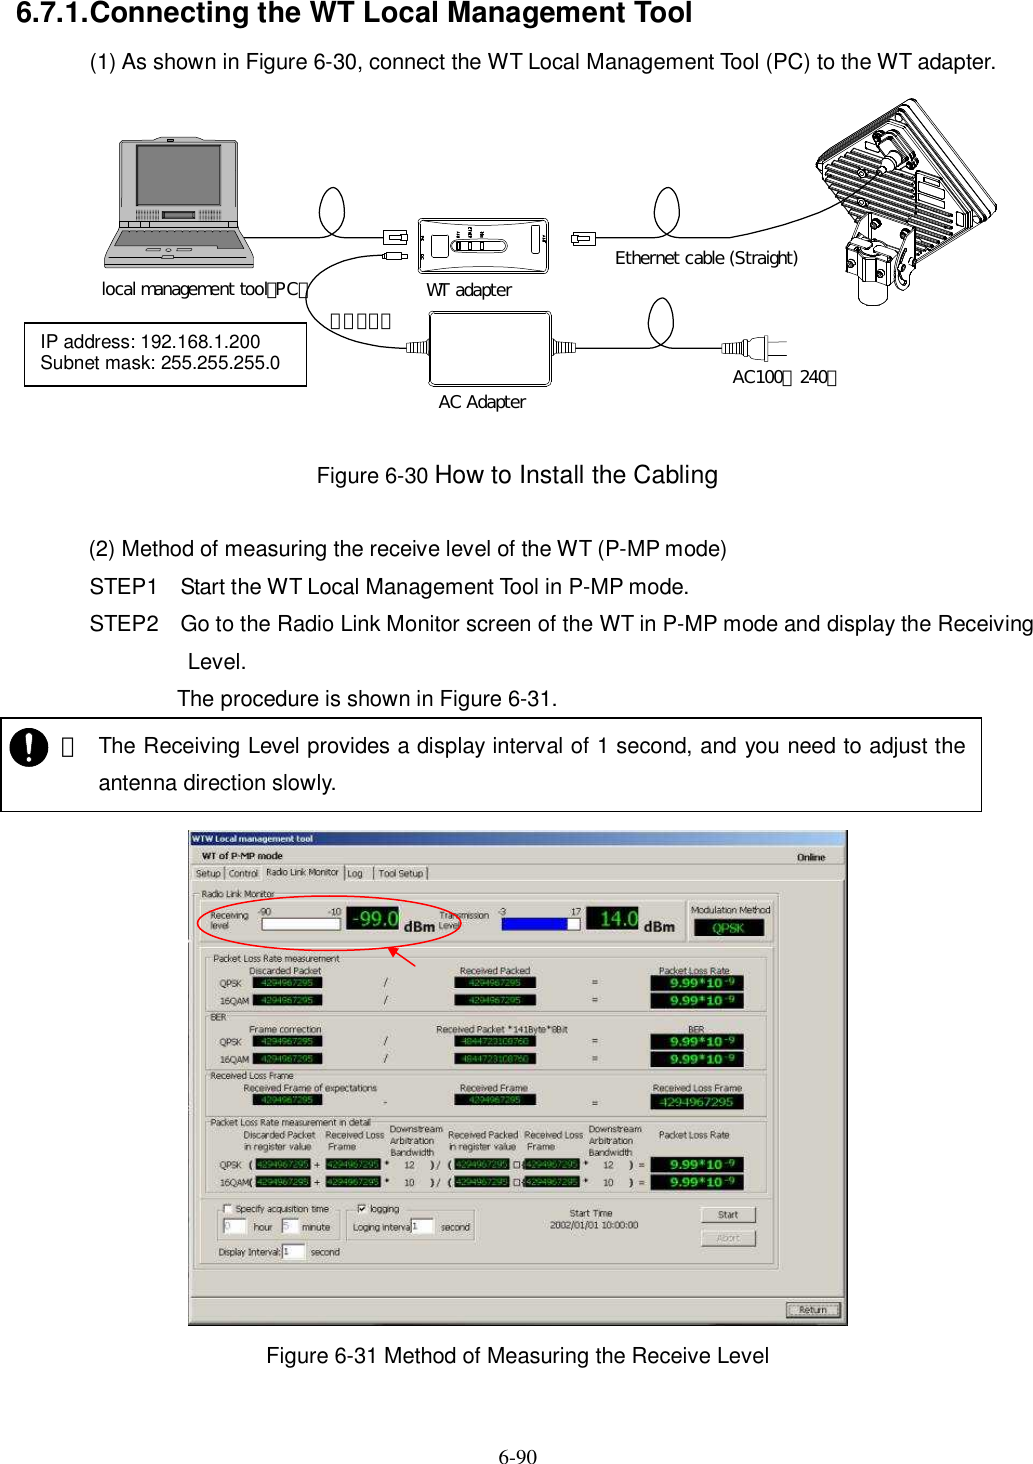   6-90 6.7.1. Connecting the WT Local Management Tool (1) As shown in Figure 6-30, connect the WT Local Management Tool (PC) to the WT adapter.  Figure 6-30 How to Install the Cabling  (2) Method of measuring the receive level of the WT (P-MP mode) STEP1 Start the WT Local Management Tool in P-MP mode. STEP2 Go to the Radio Link Monitor screen of the WT in P-MP mode and display the Receiving Level. The procedure is shown in Figure 6-31.   Figure 6-31 Method of Measuring the Receive Level WT adapterAC Adapter AC100∼240ＶＤＣ２４Ｖlocal management tool（PC）Ethernet cable (Straight)IP address: 192.168.1.200 Subnet mask: 255.255.255.0    ・ The Receiving Level provides a display interval of 1 second, and you need to adjust the antenna direction slowly.   